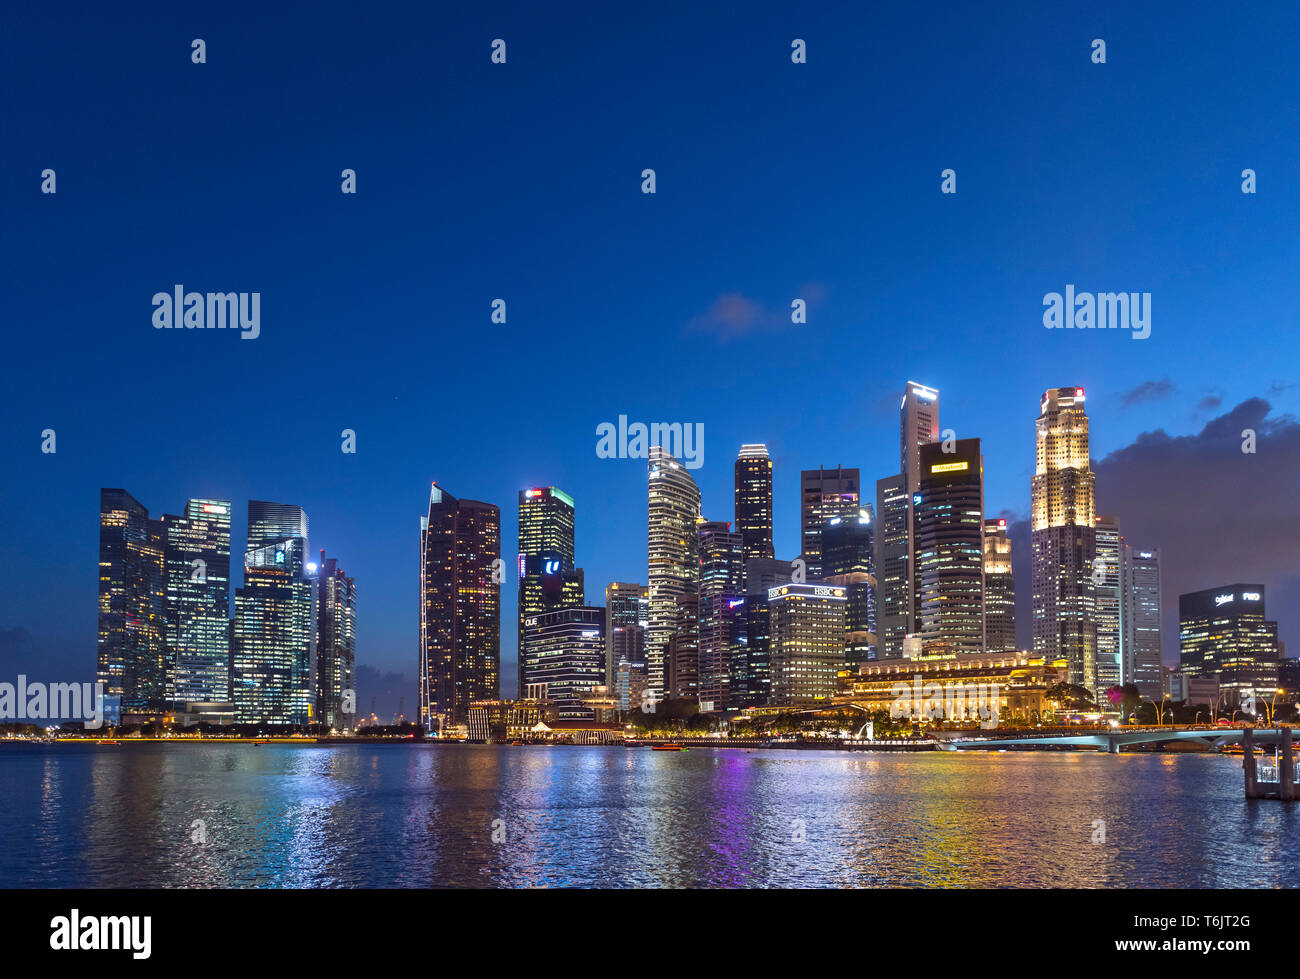 The Central Business District (CBD) at night from Marina Bay, Singapore Stock Photo